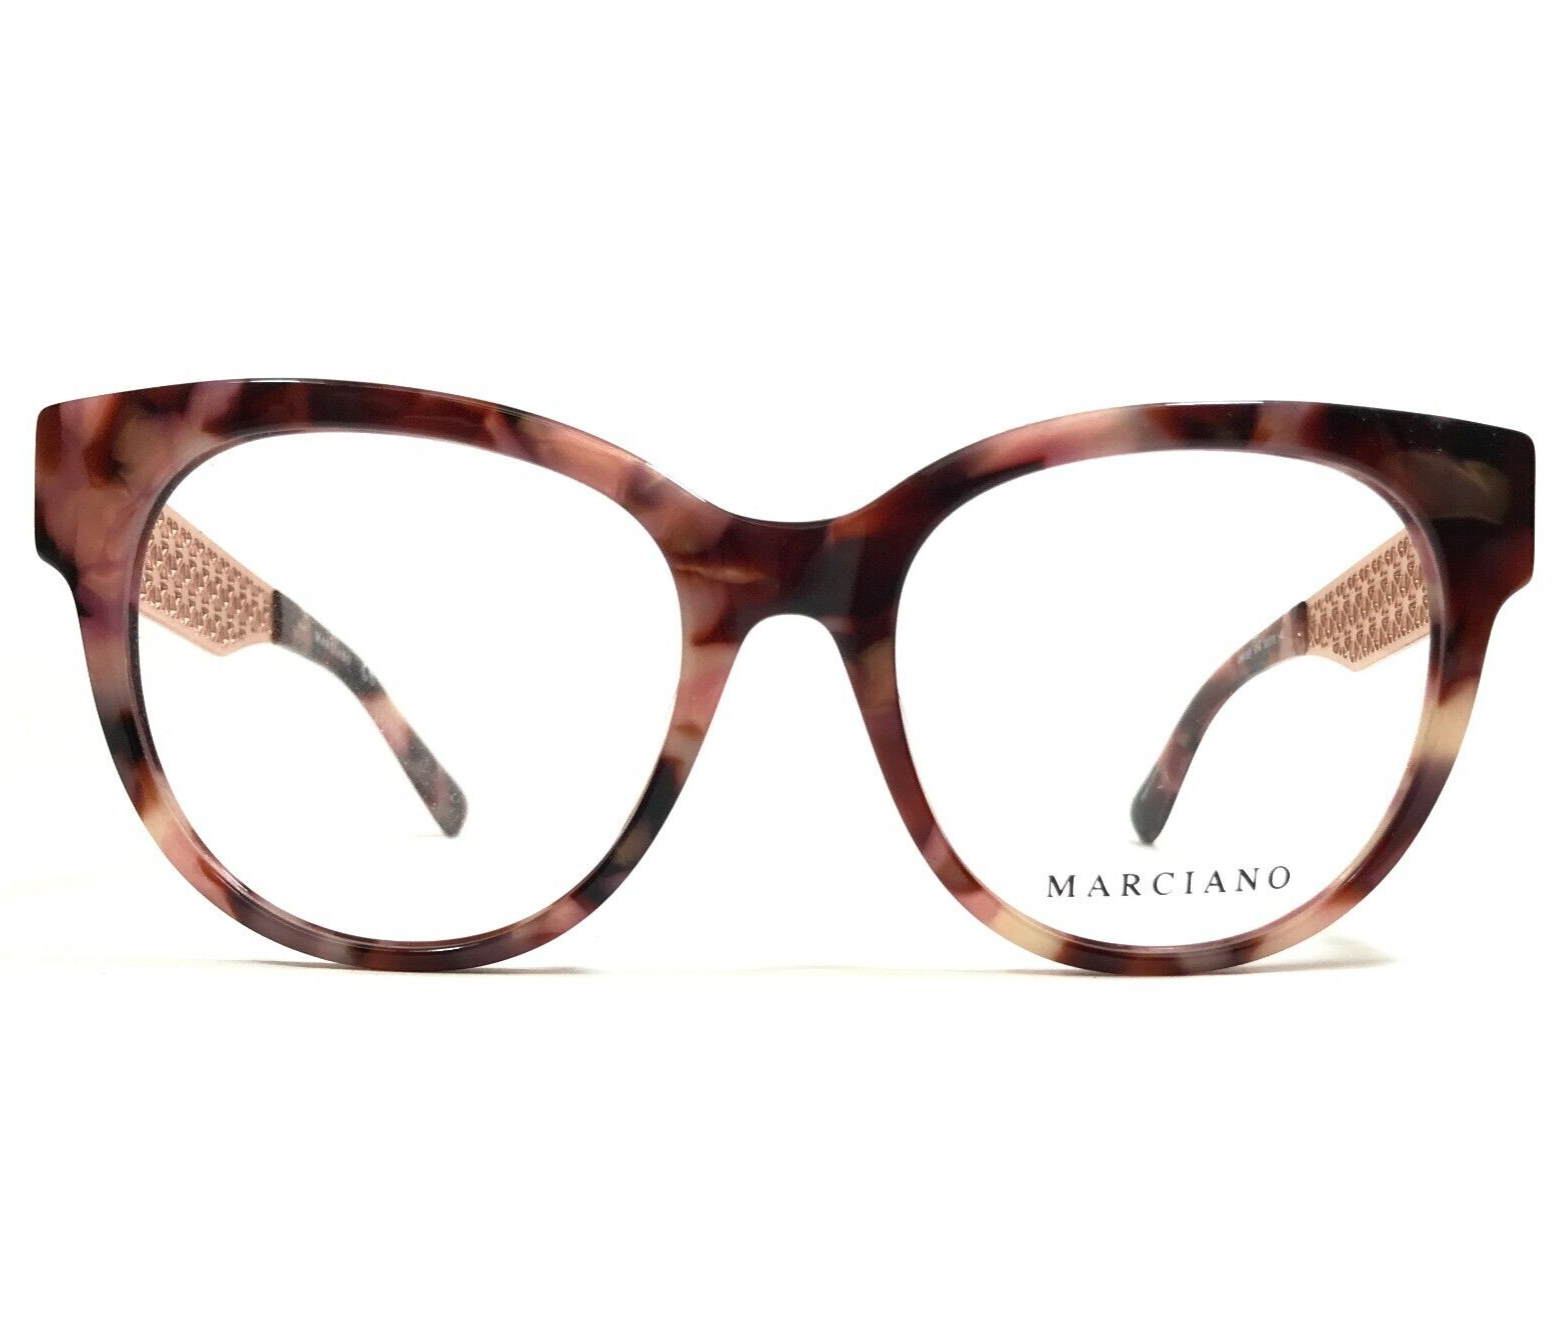 GUESS by Marciano Eyeglasses Frames GM0357 074 Tortoise Rose Gold 52-18-140 - $65.03